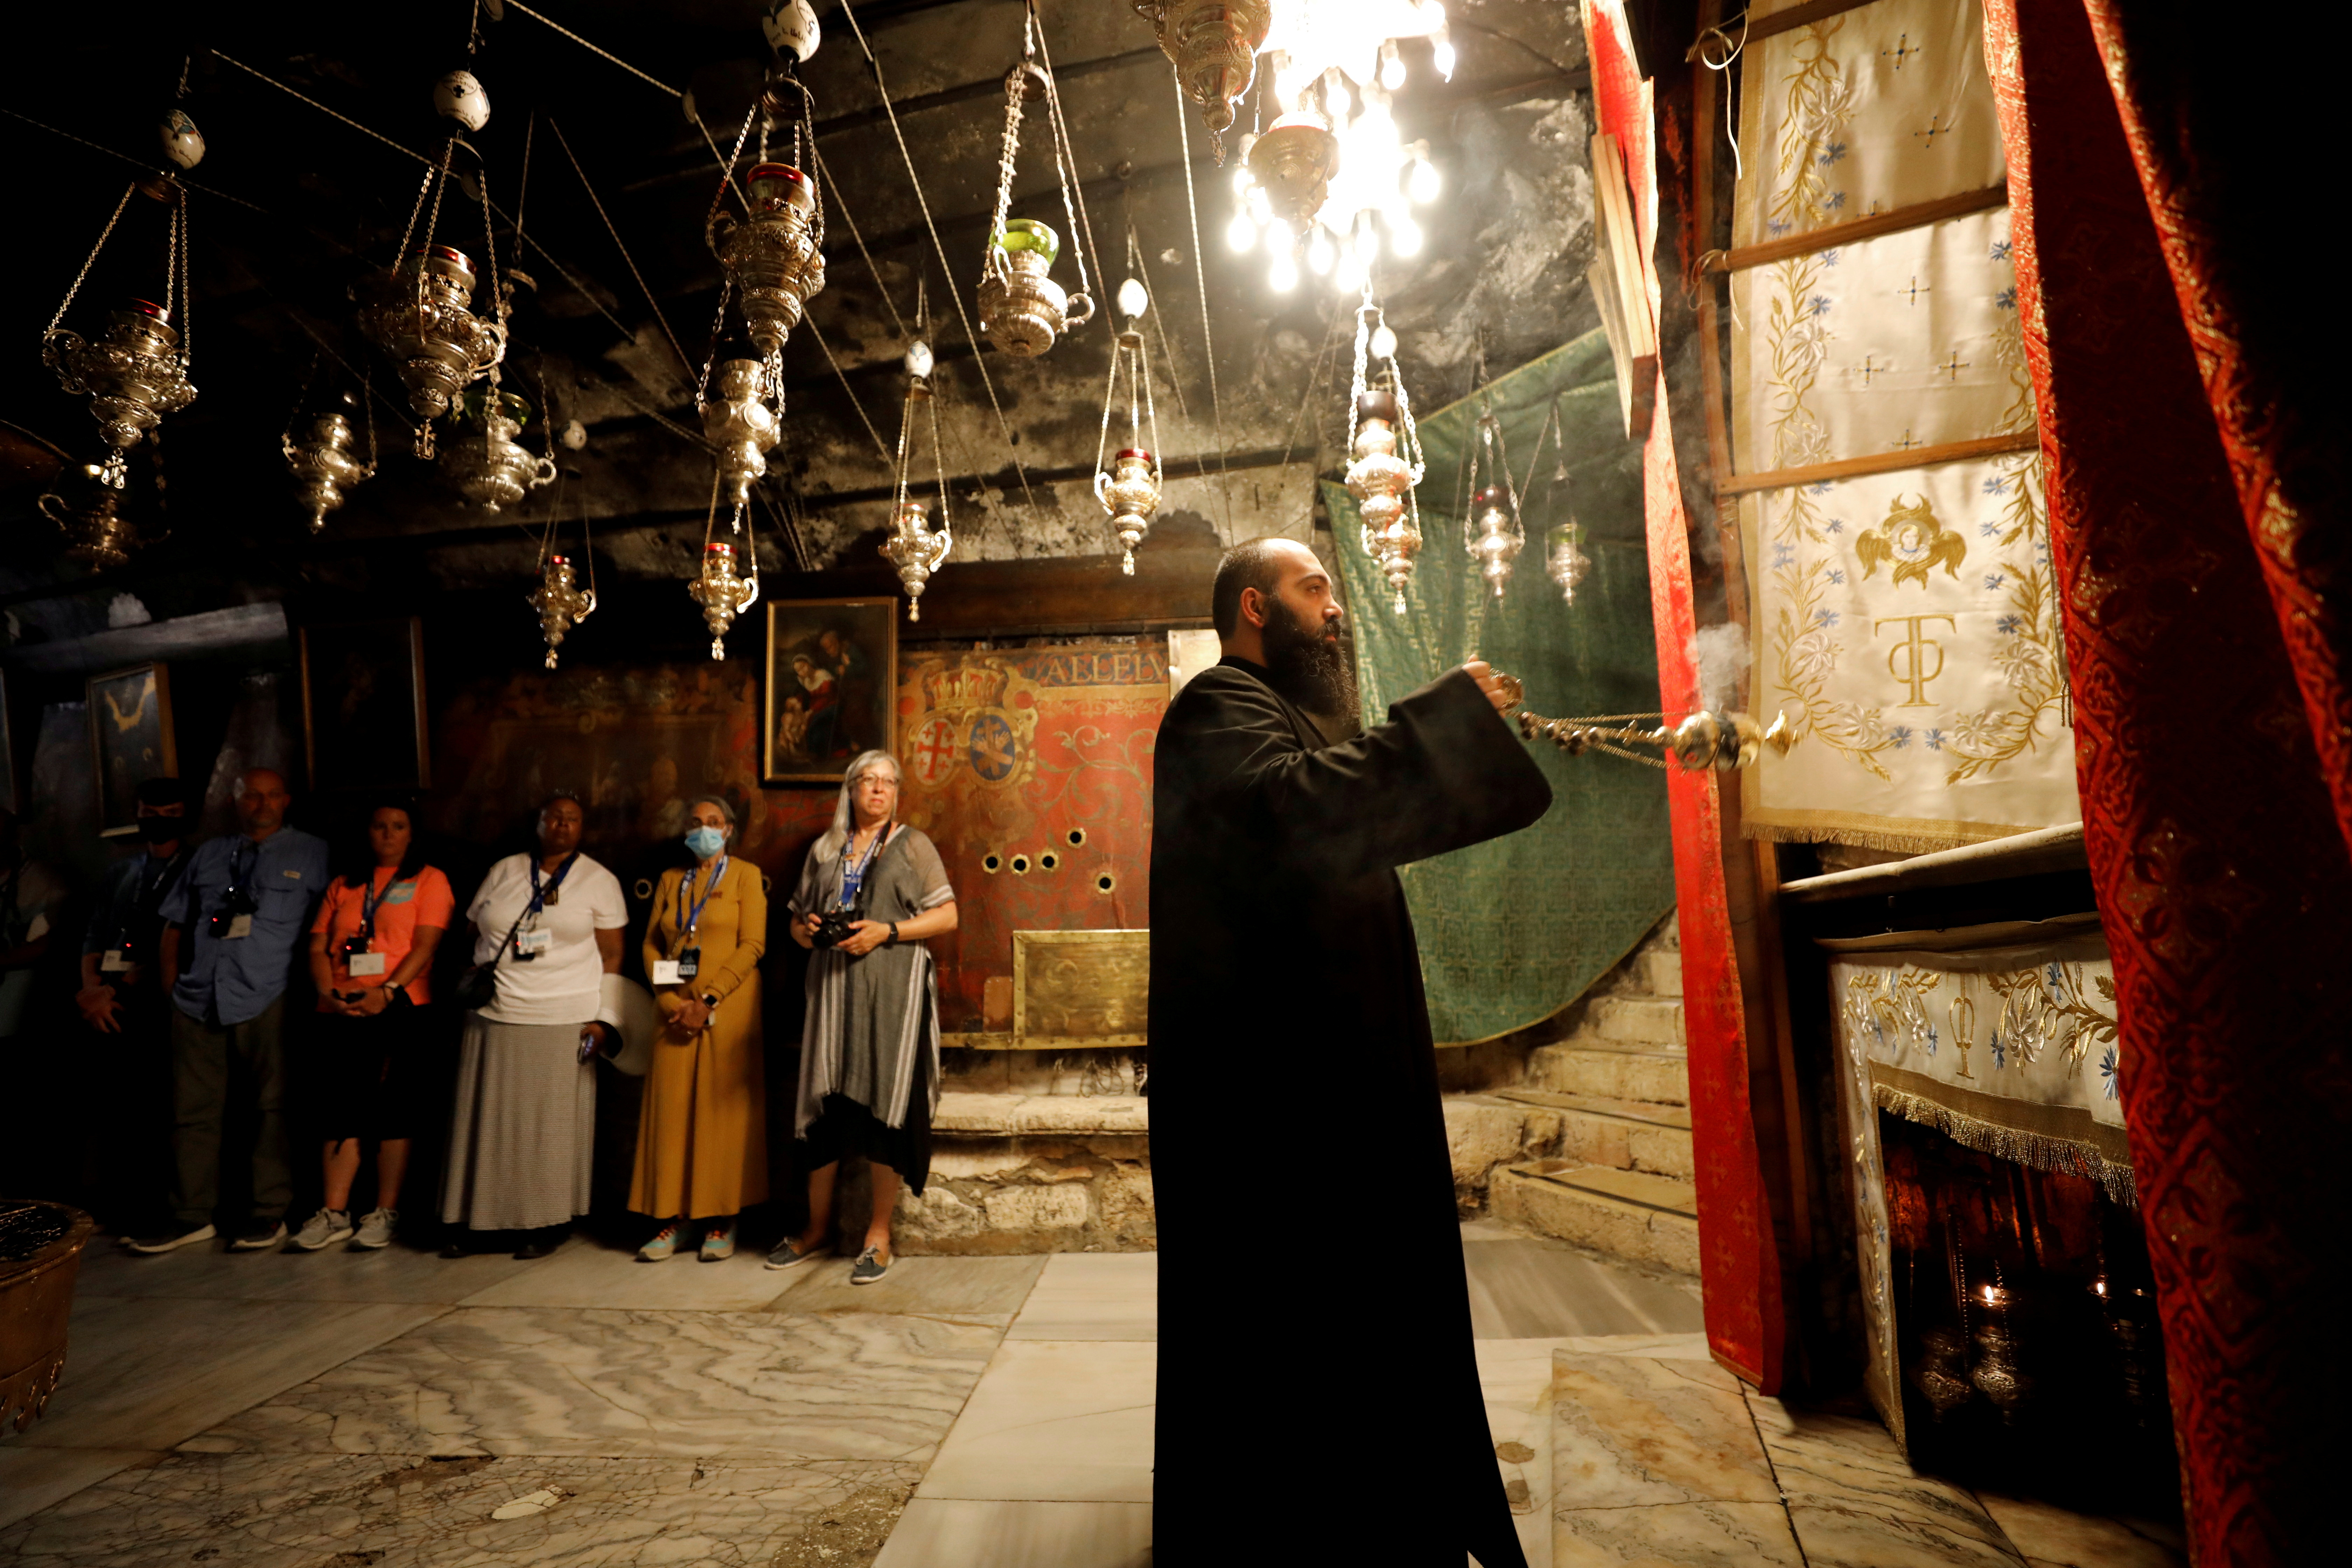 Foreign tourists visit the church of Nativity in Bethlehem, as the coronavirus disease (COVID-19) restrictions ease